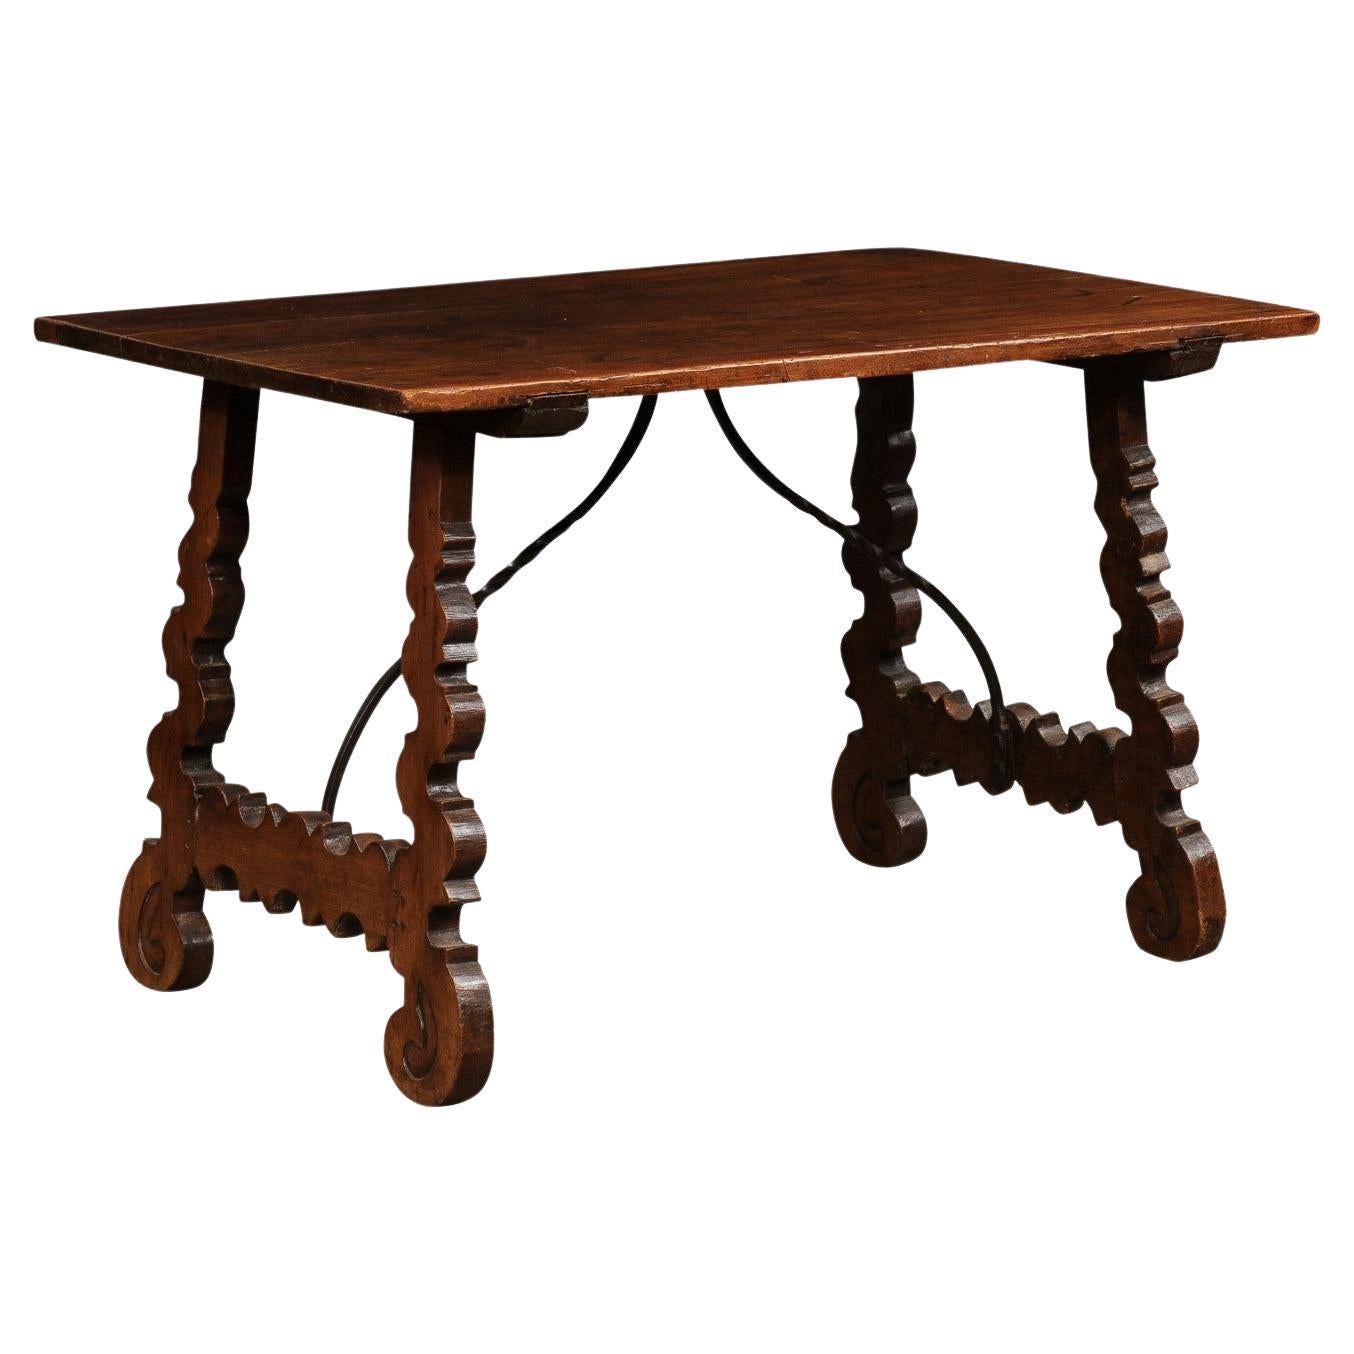 Spanish Baroque Style 19th Century Walnut Fratino Table with Lyre Shaped Base